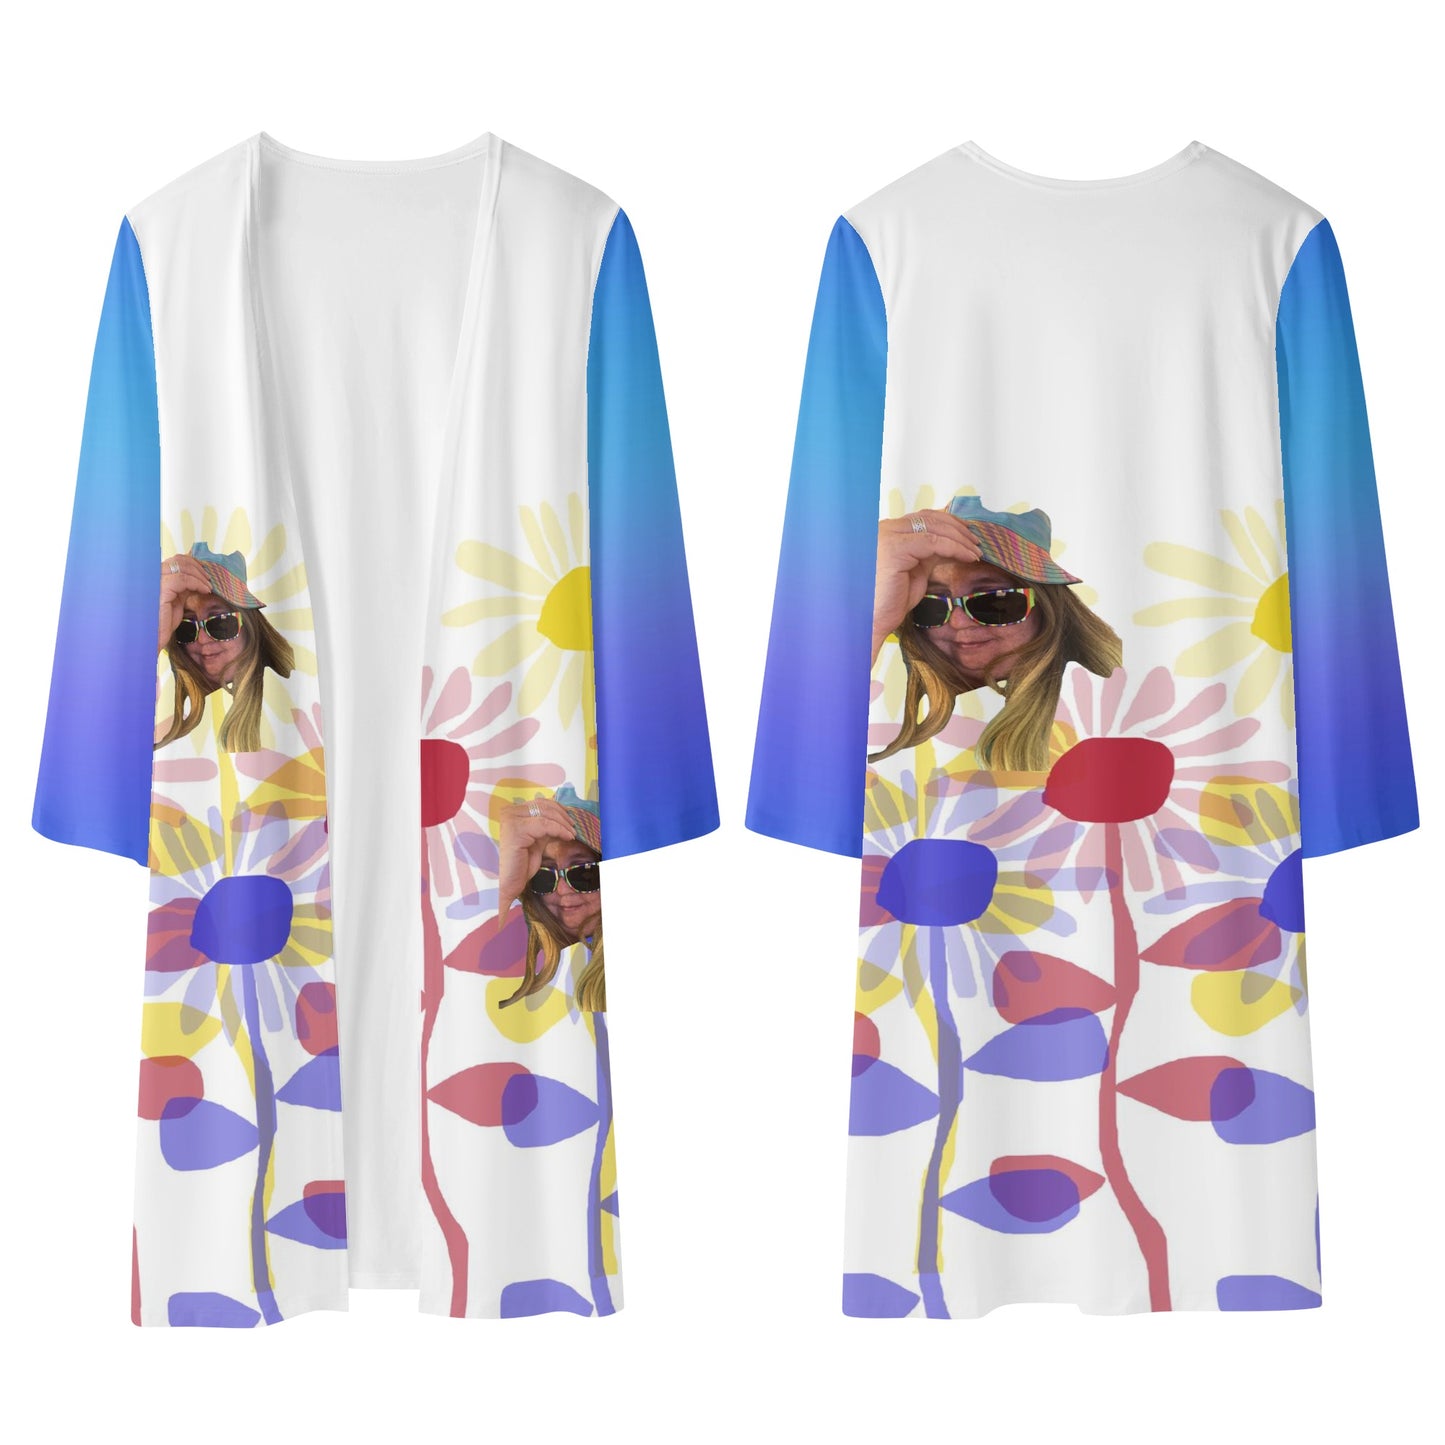 Create a Crop Face Colorful Sunflower Womens Long Sleeve Jacket Cardigan